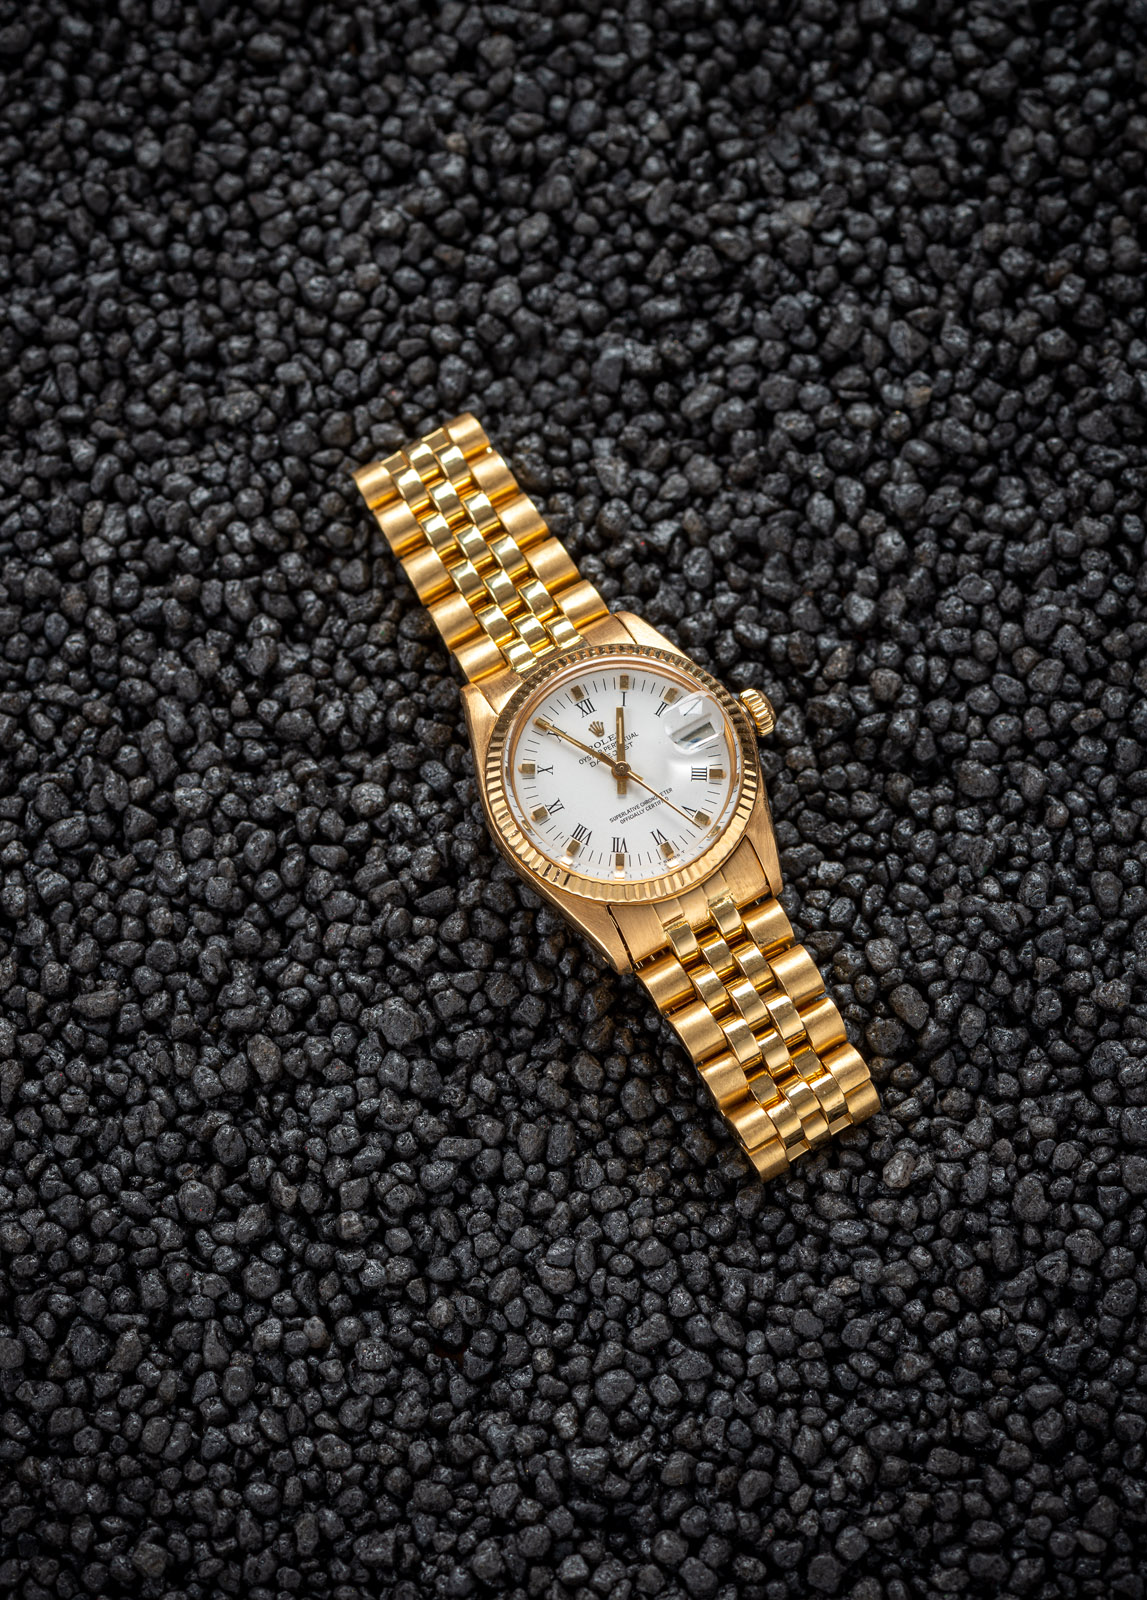 A RARE ROLEX OYSTER MEDIUM LADY'S WATCH - Image 3 of 3